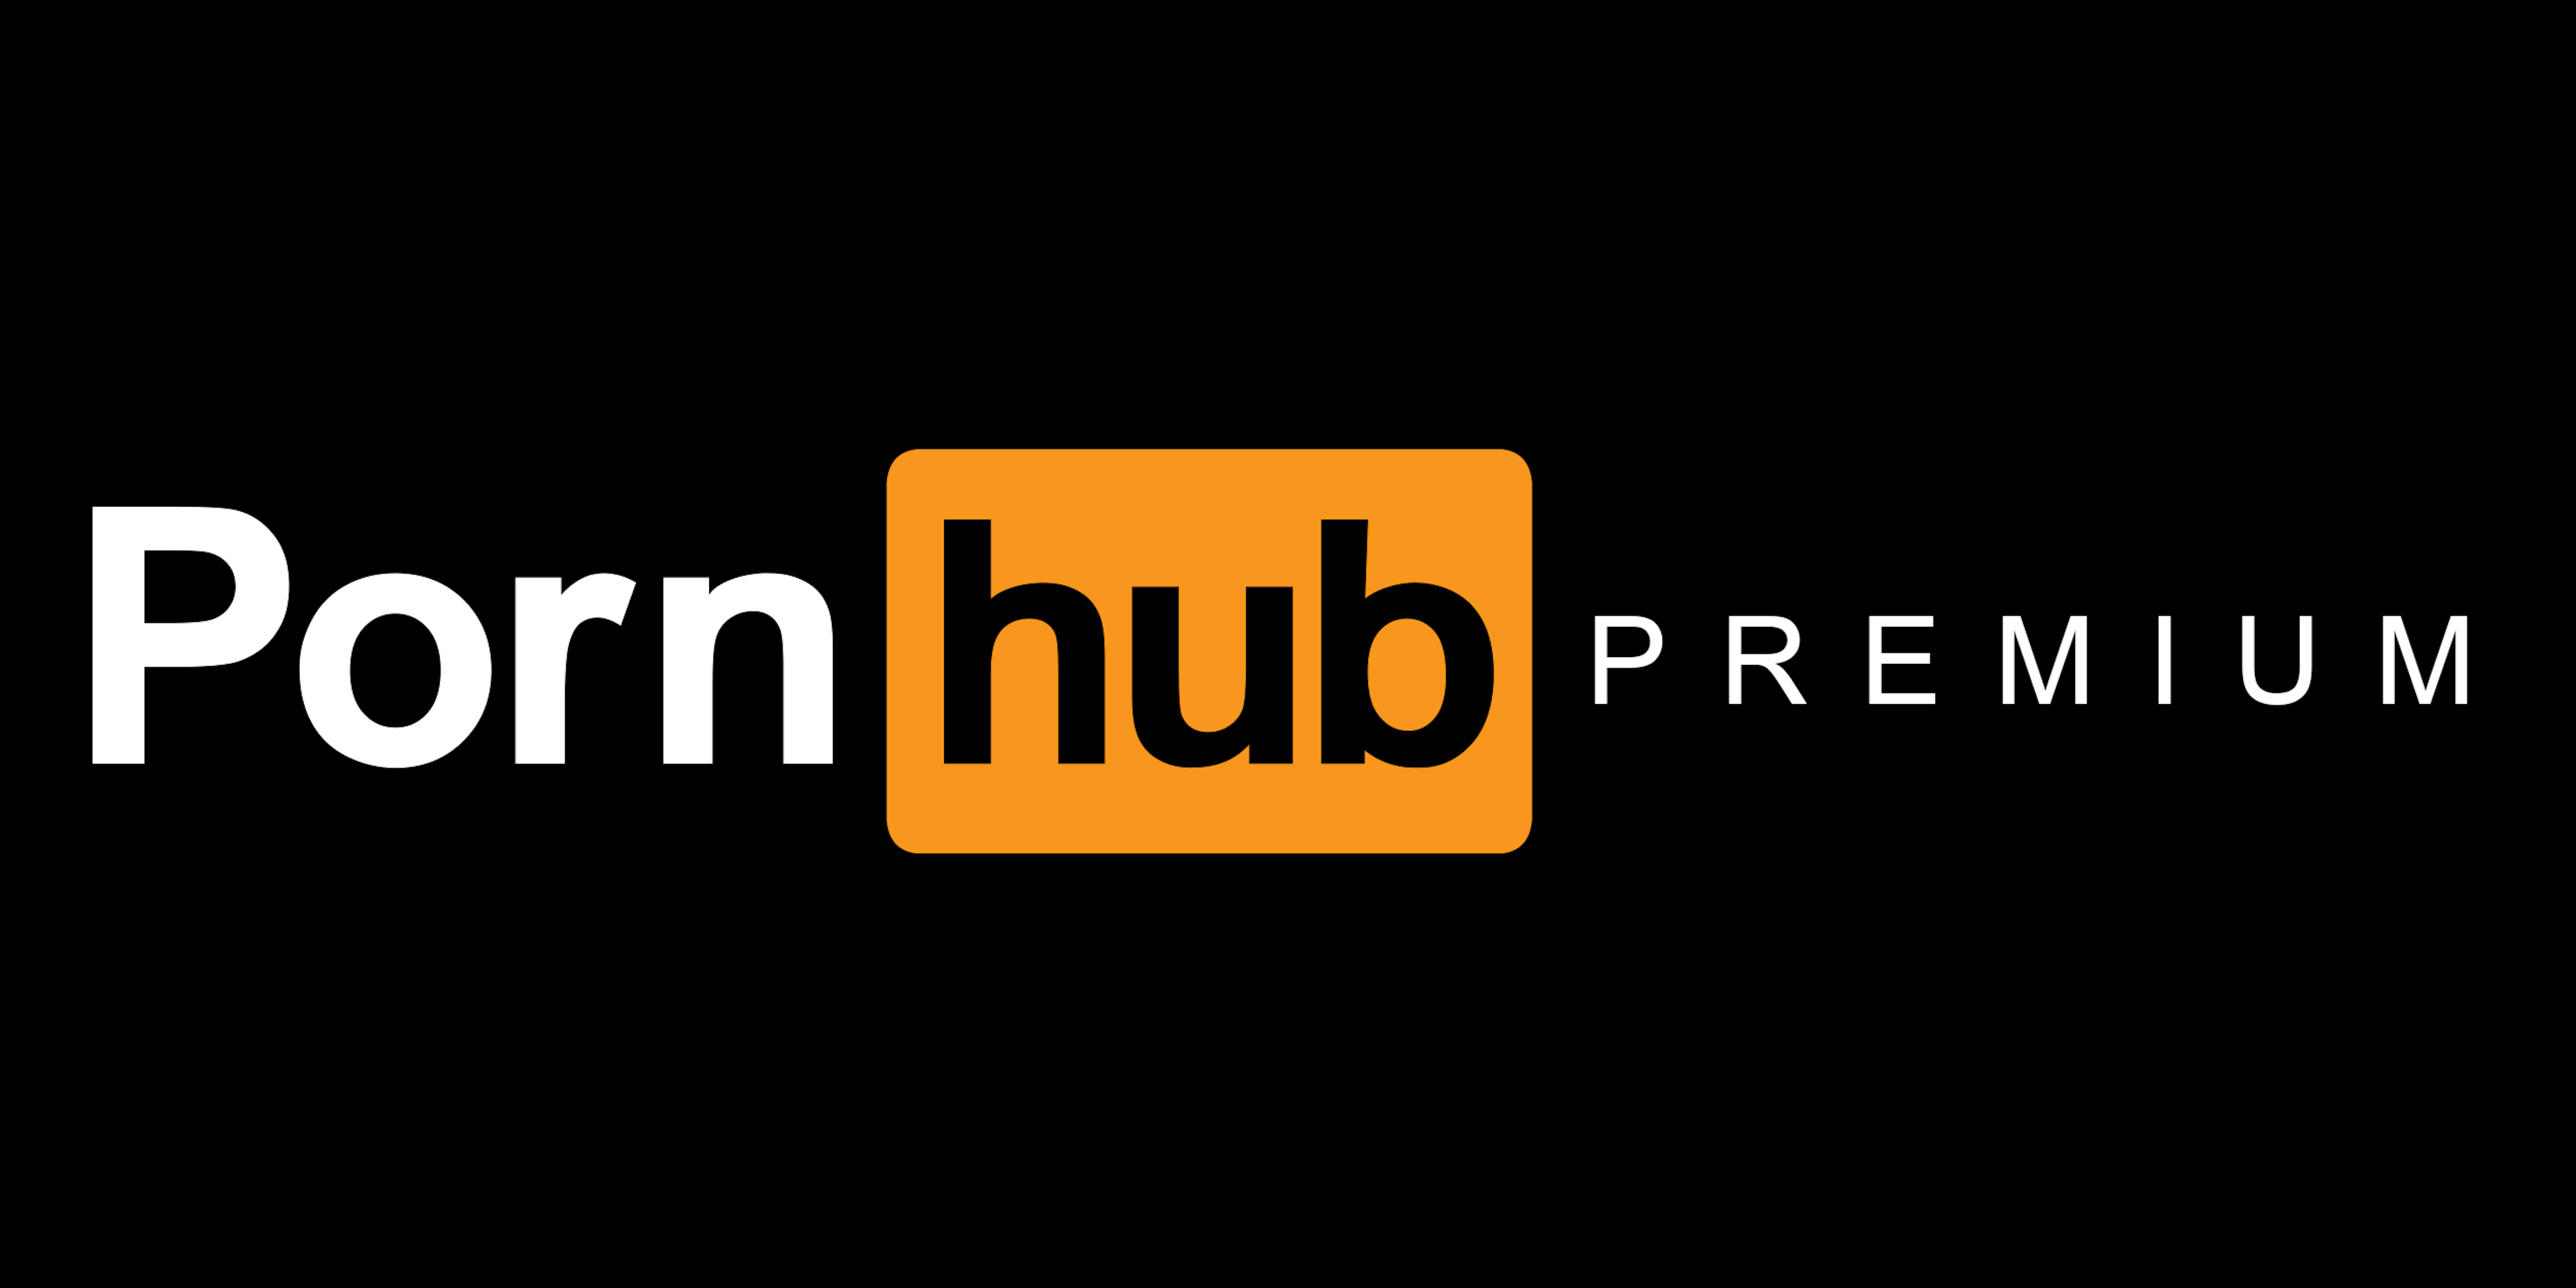 Pron Videos Download 10 Minutes High Quality - Is Pornhub Premium Worth It? Cost, Features, and Unexpected Benefits